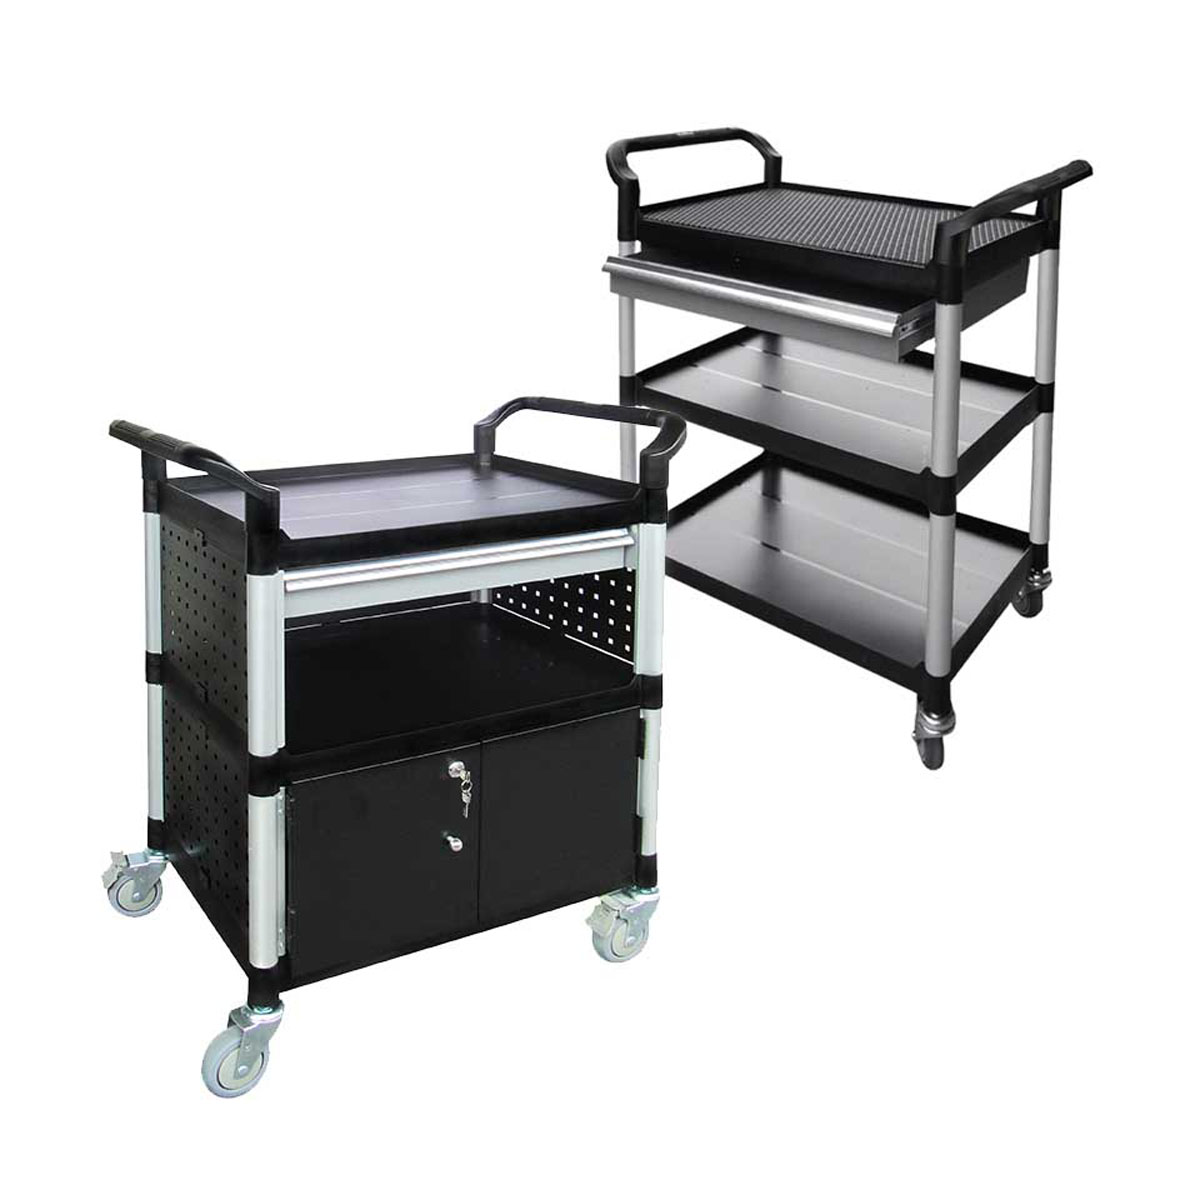 Buy Utility Storage Cart Multipurpose Trolley available at Astrolift NZ